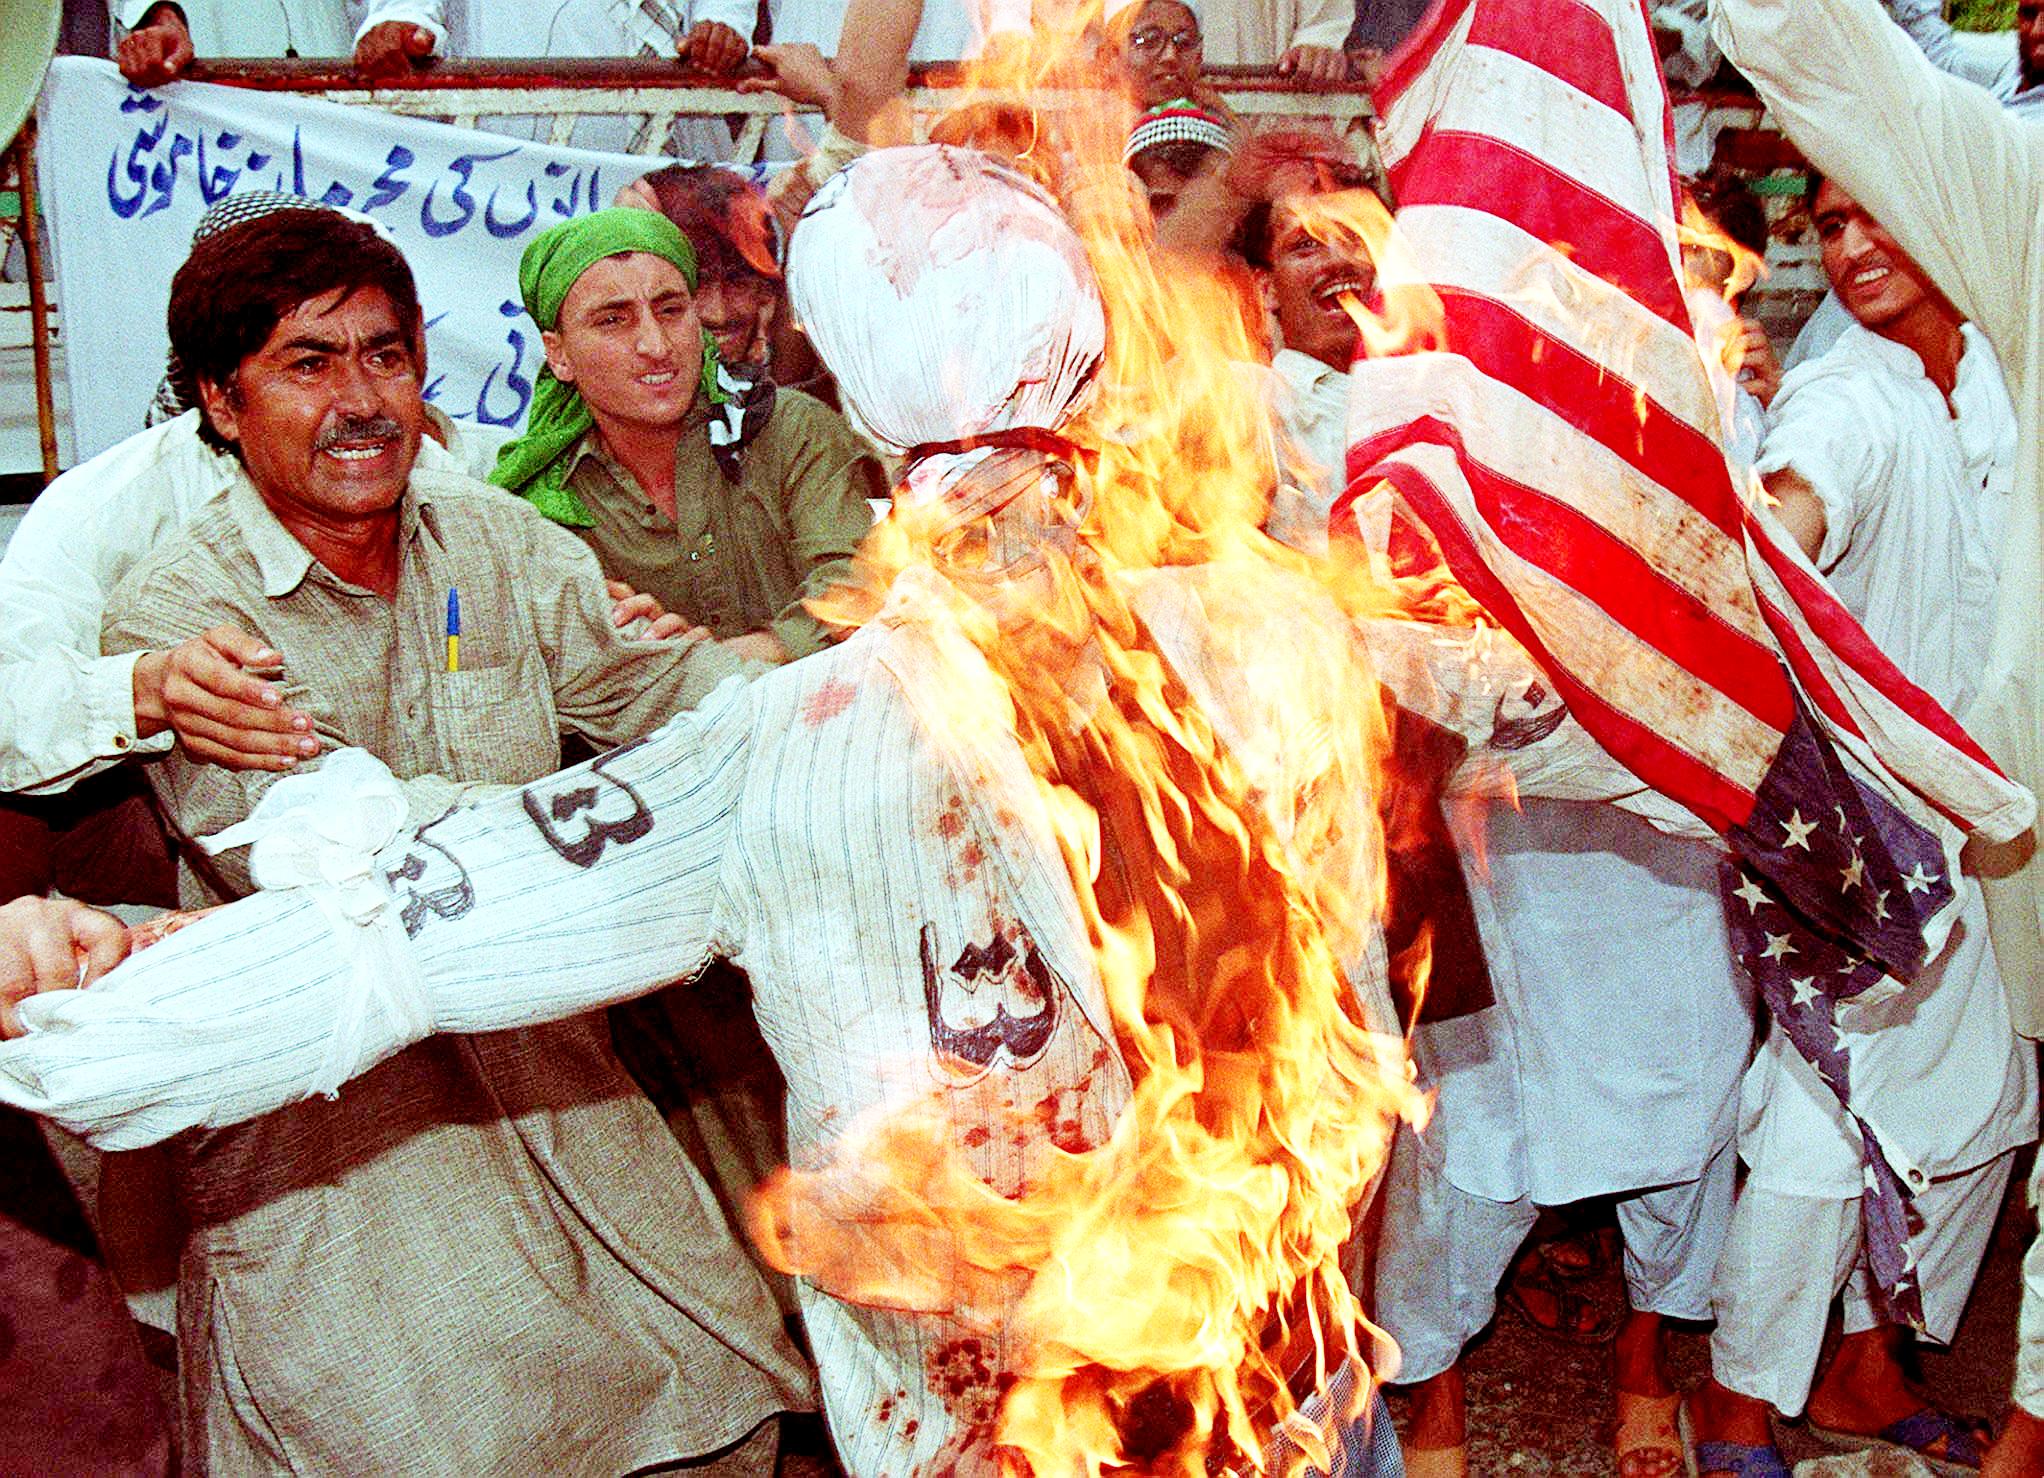 Members of Pakistan's religious group Sipah Sahaba Pakistan burn an effigy of Bill Clinton and an American flag in Karachi in protest at the US airstrikes on Afghanistan